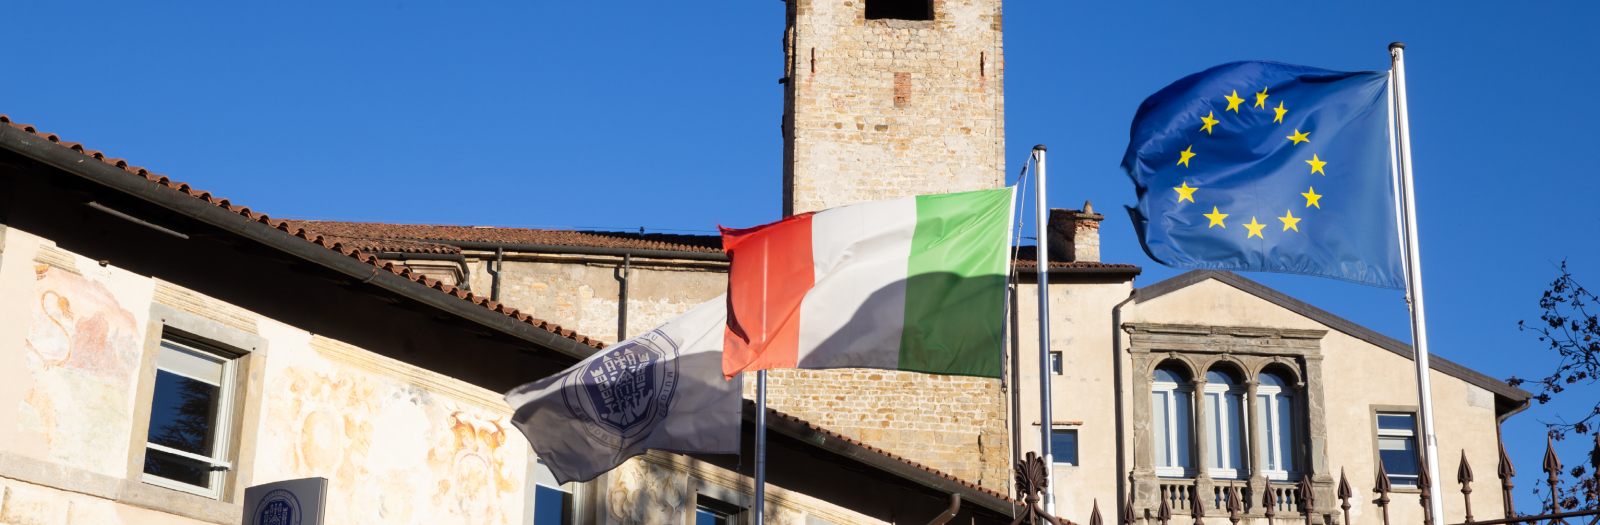 Flags in Sant'Agostino